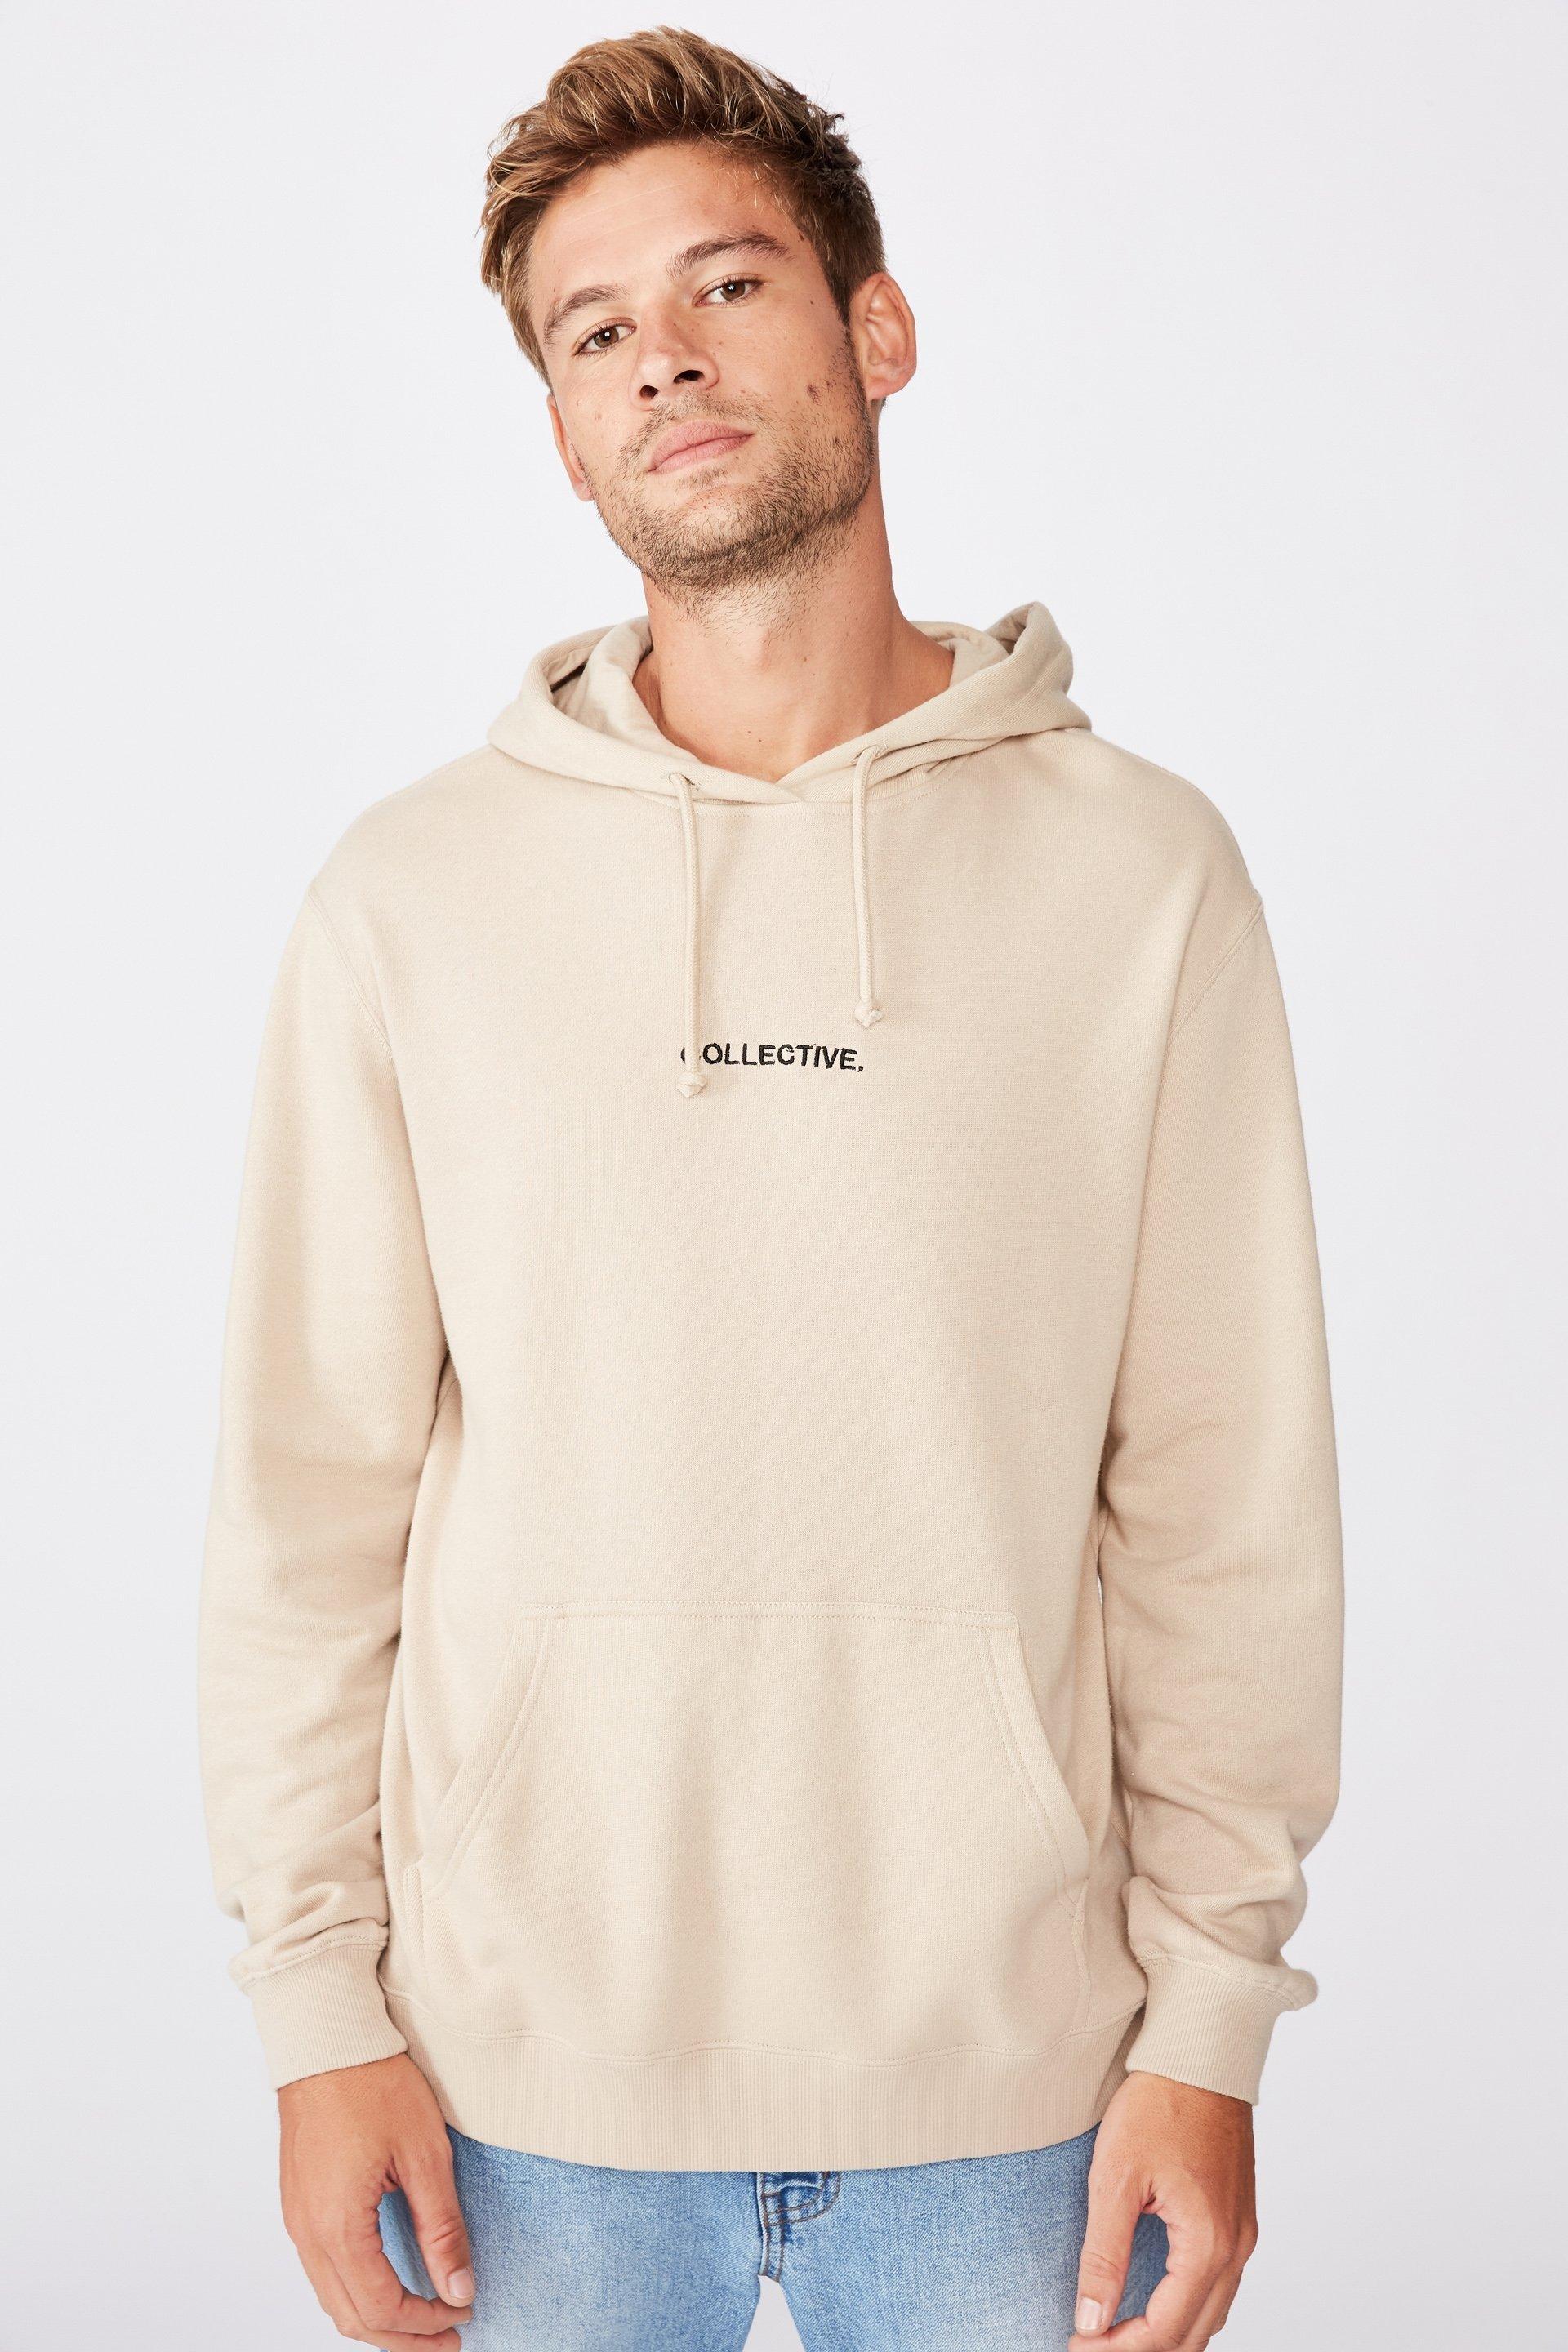 Collective fleece pullover - stone clay Cotton On Hoodies & Sweats ...